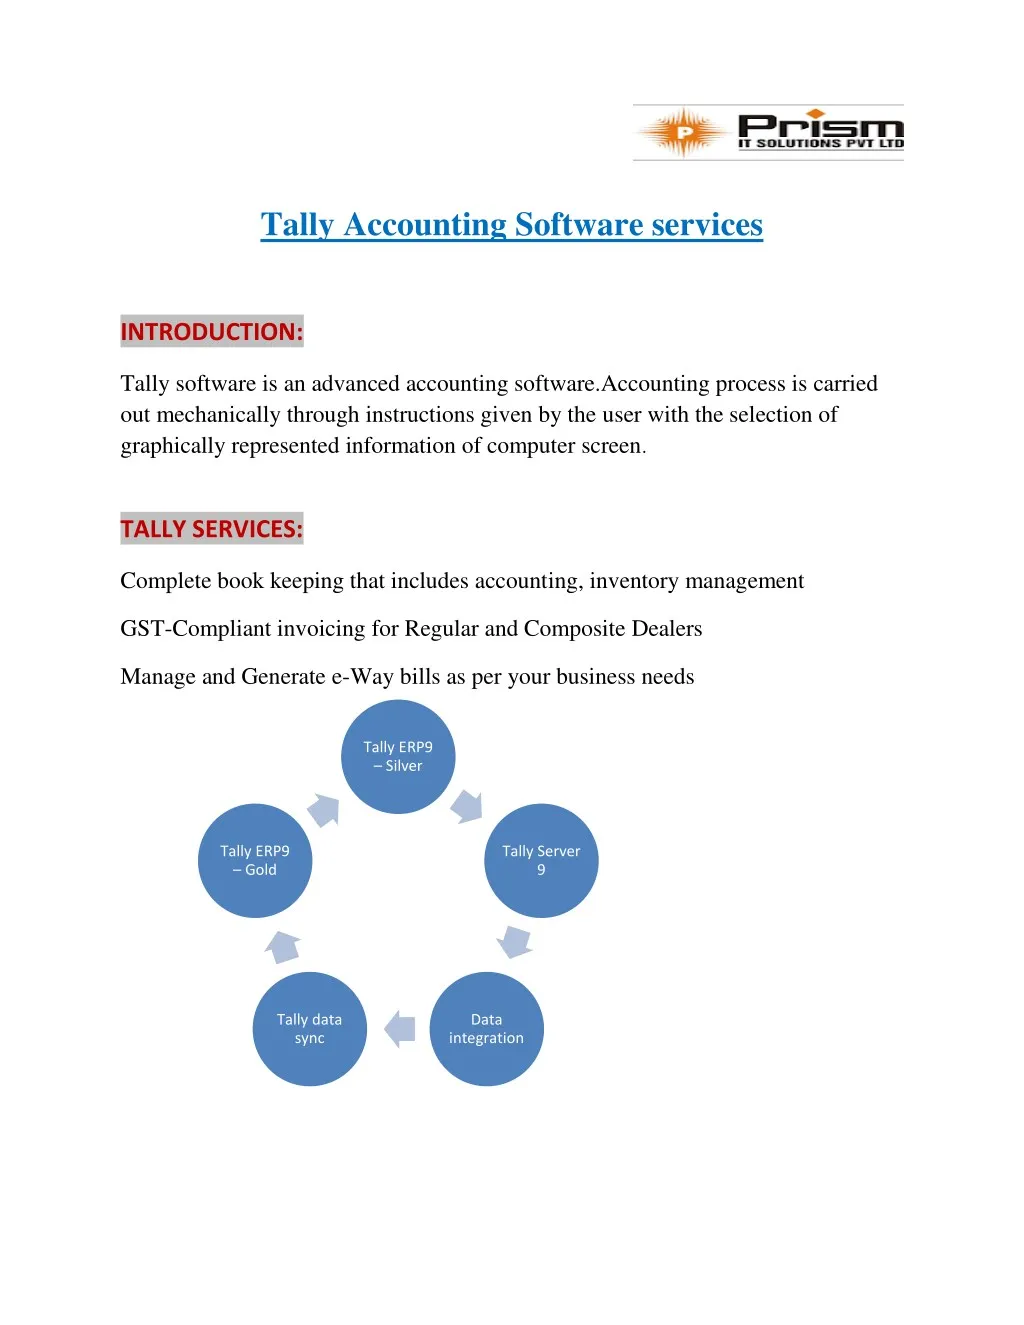 tally accounting software services